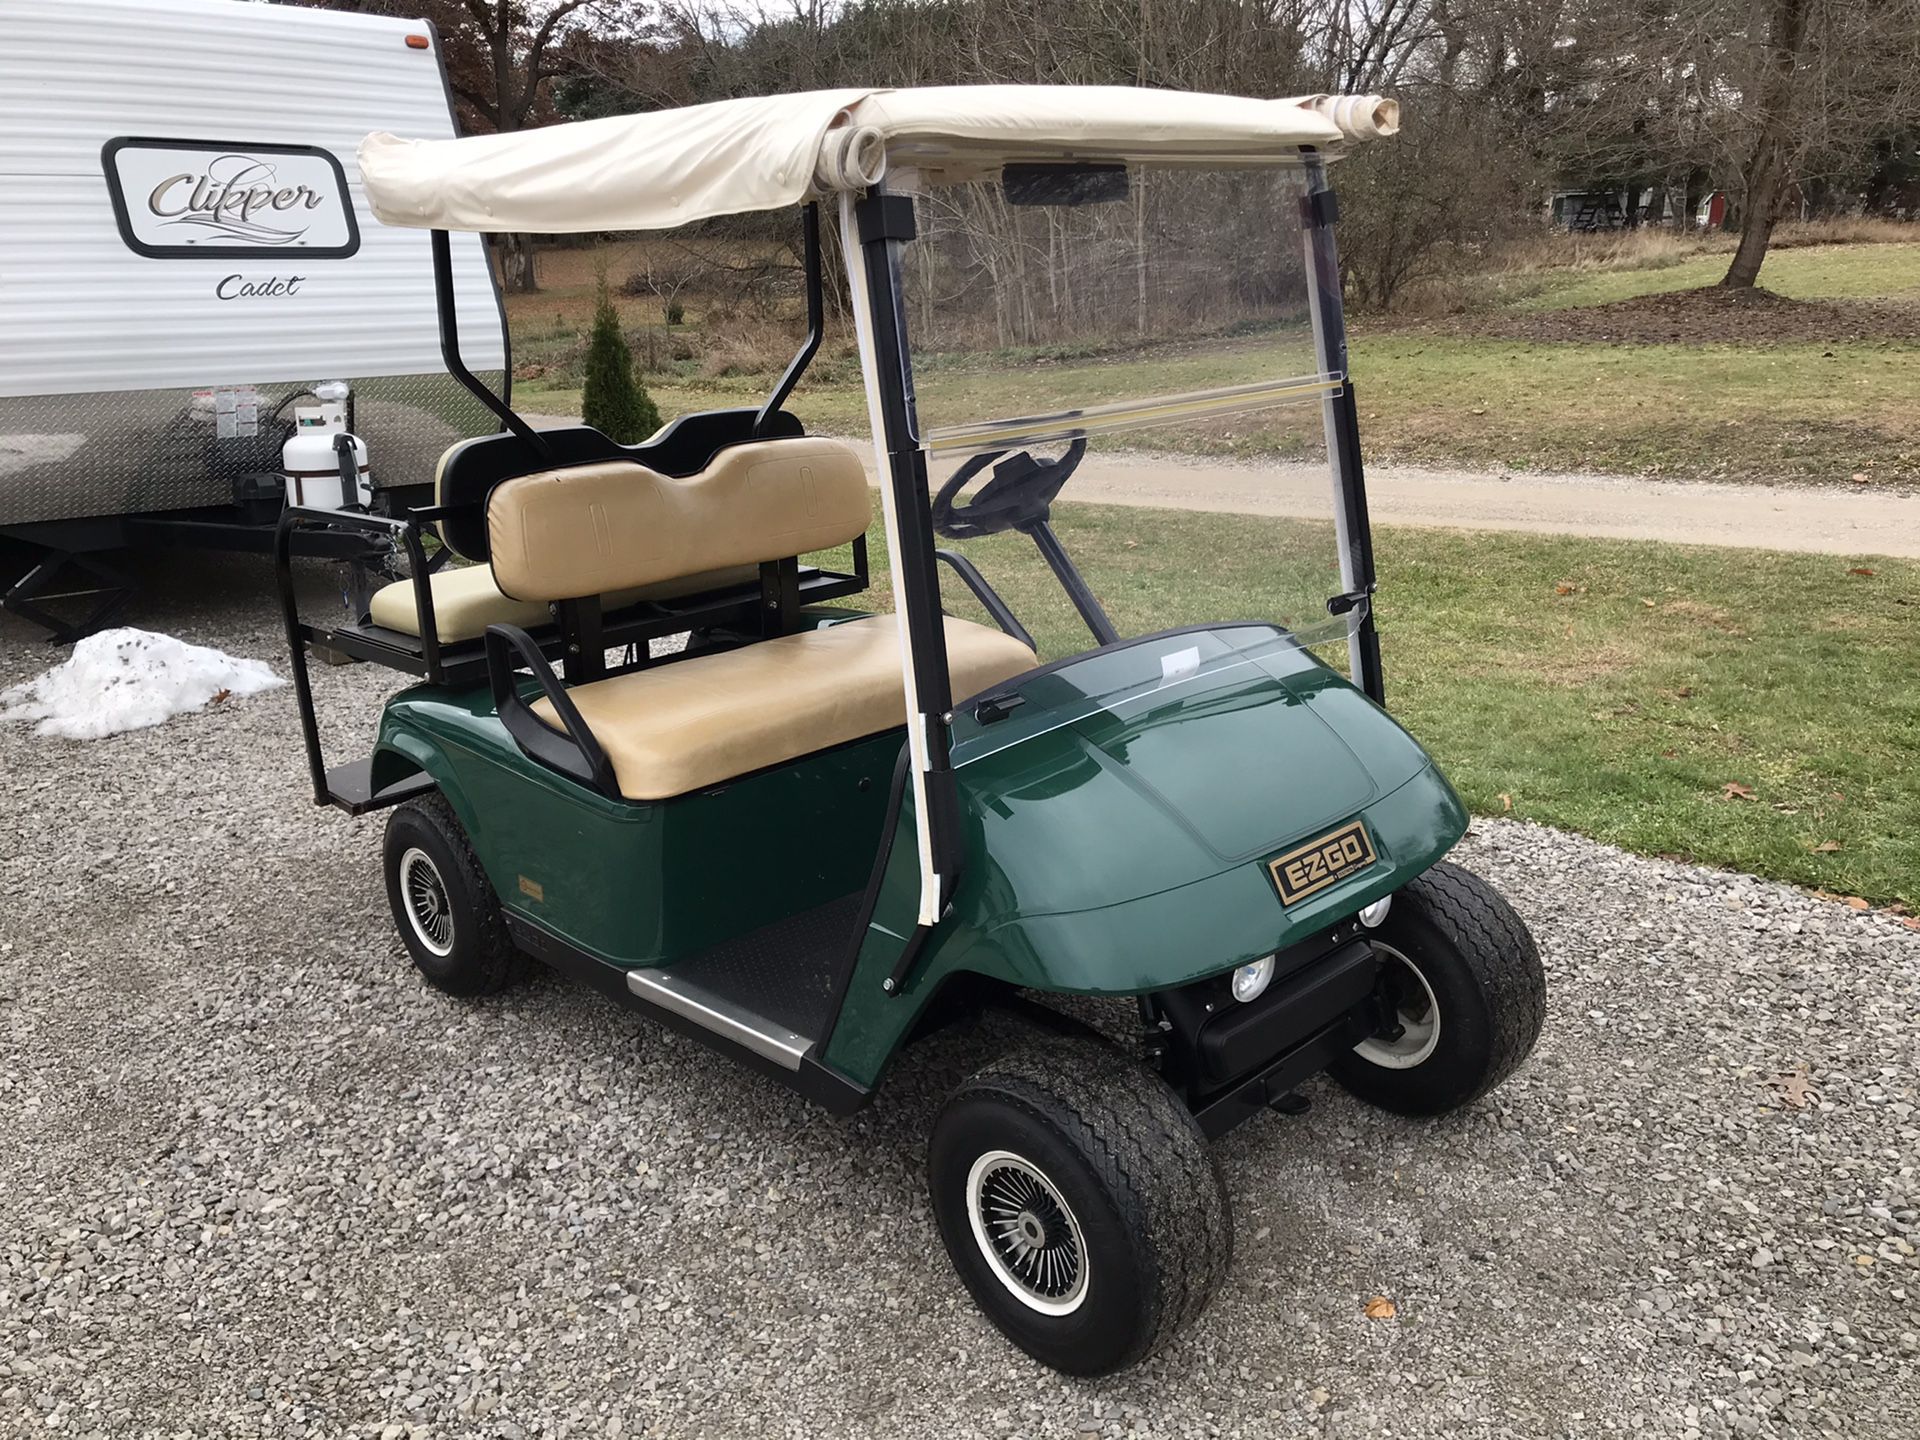 2005 36v EZ-GO Golf Cart W/Charger*Excellent Condition*Brand New Battery’s 11/2019*Location Perry MI